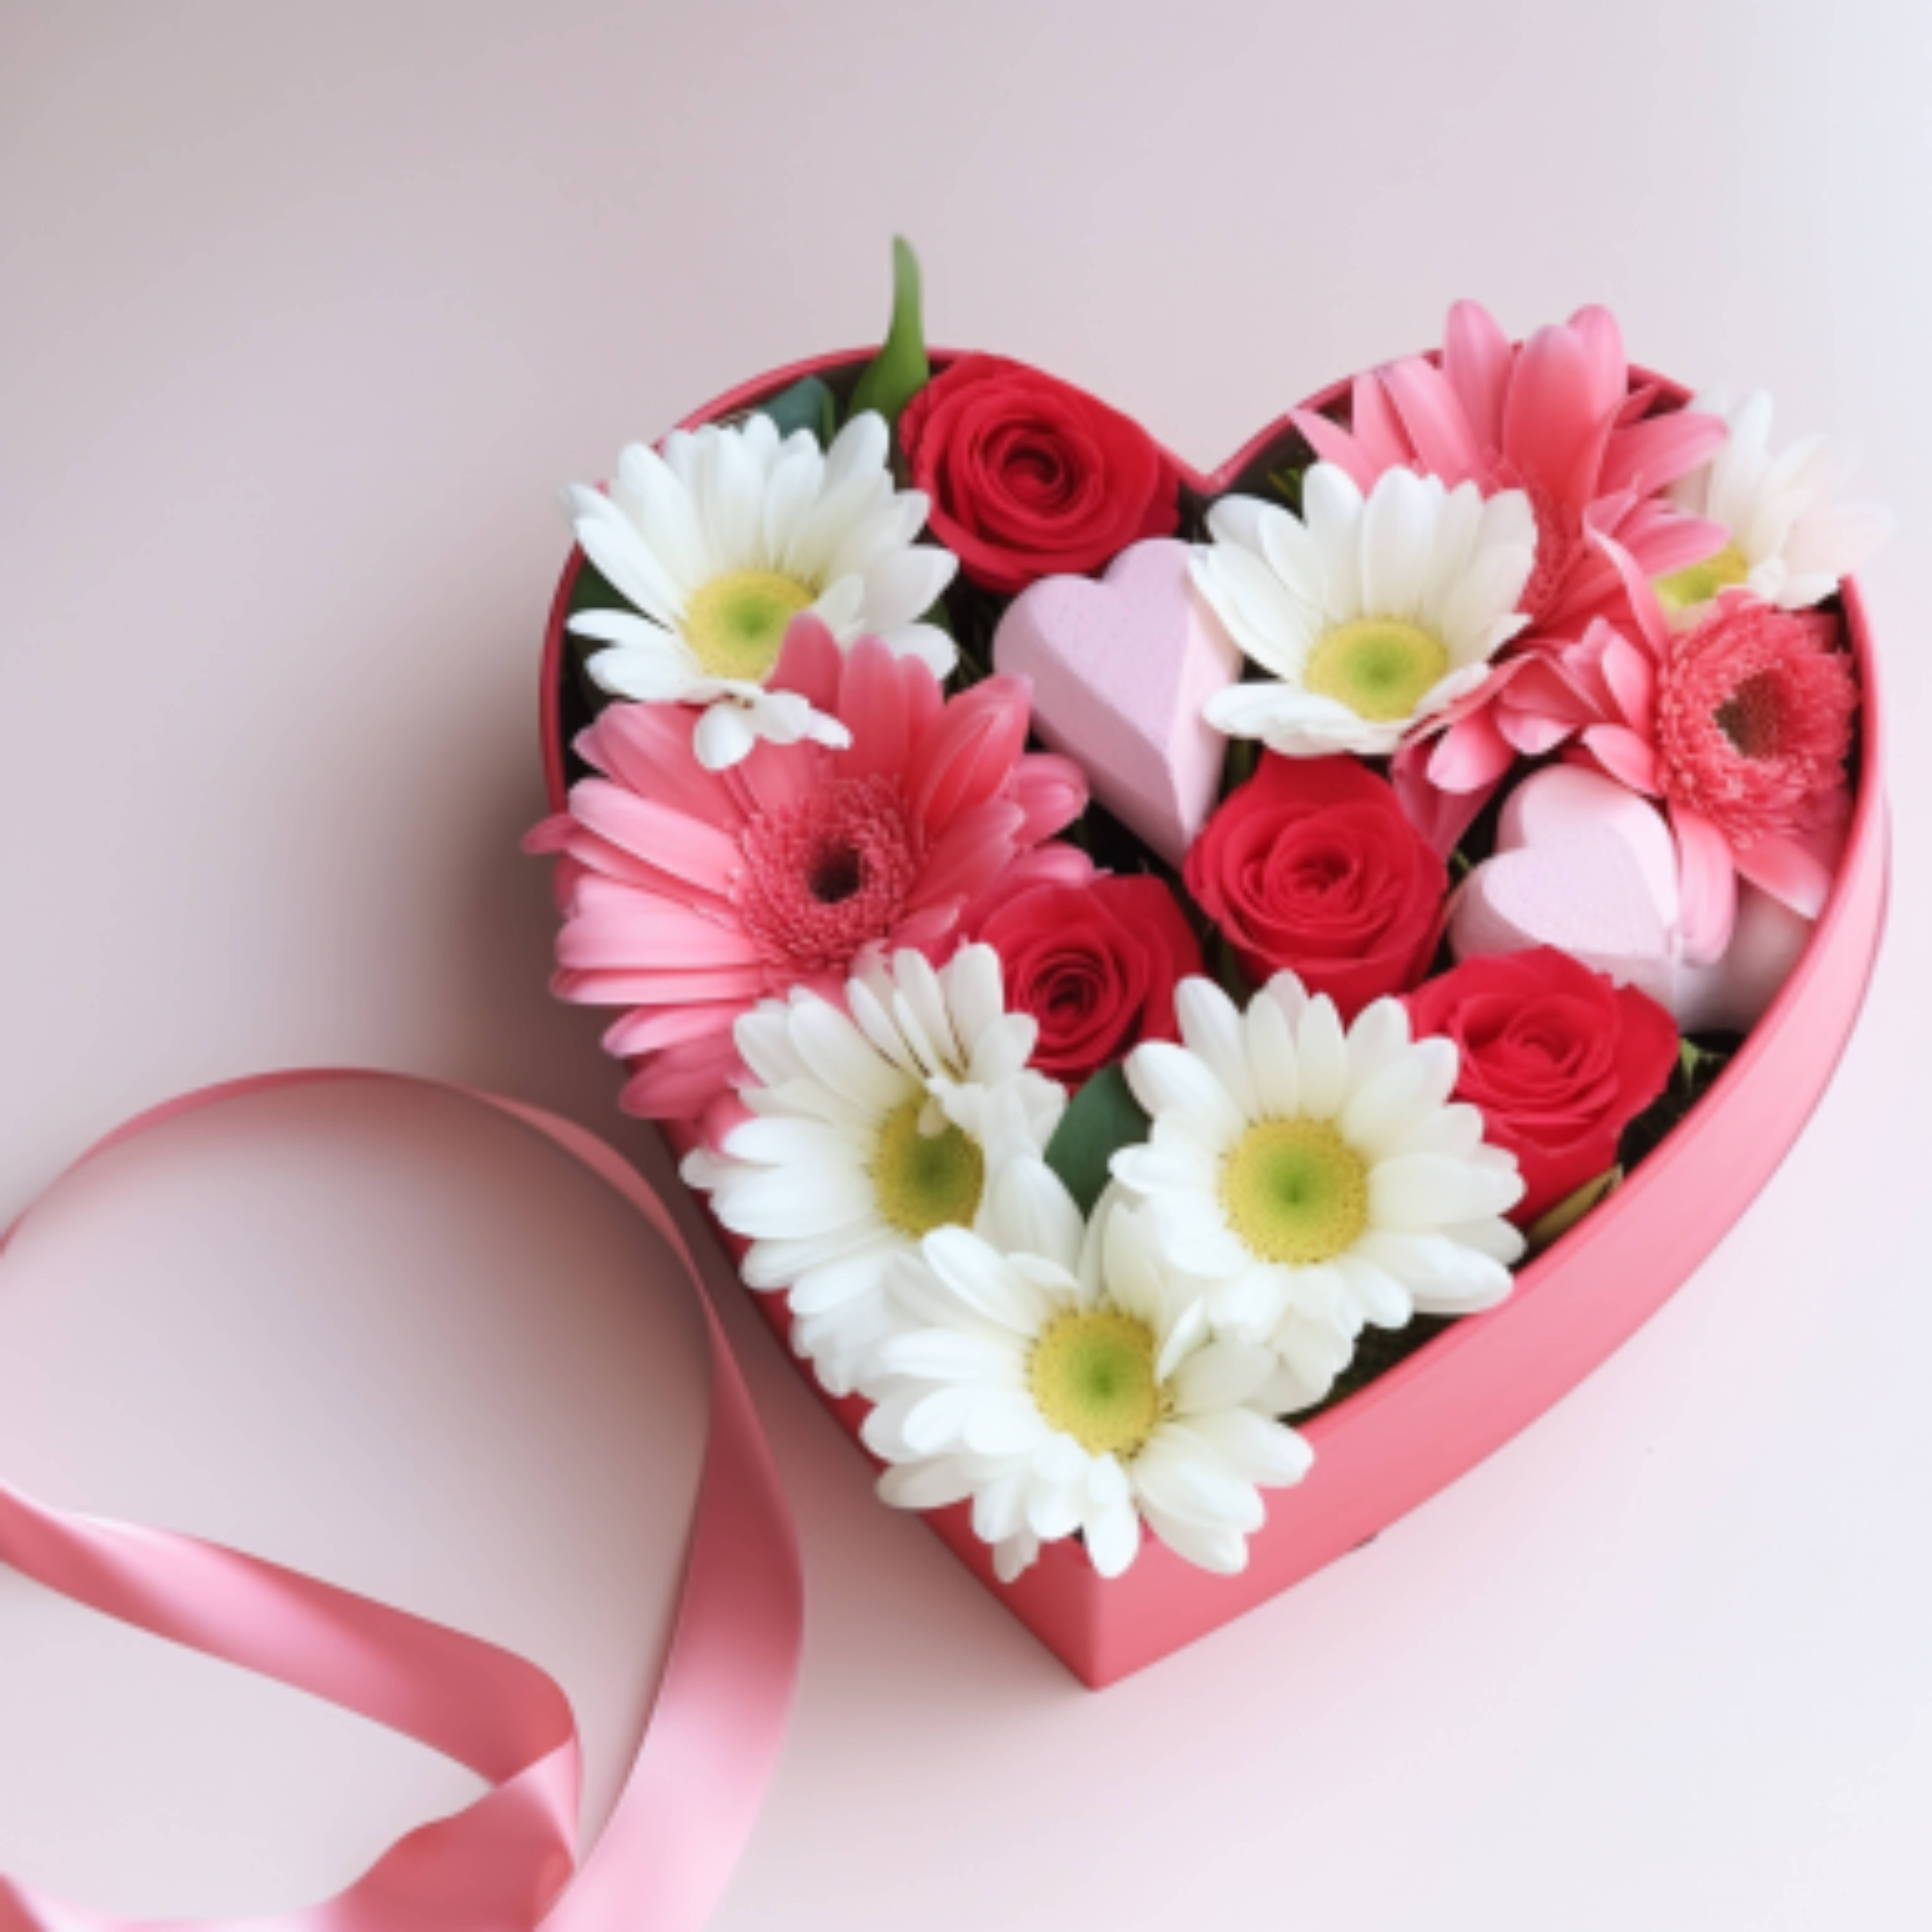 heart-shaped-box-flowers-is-pink-background-mother-day